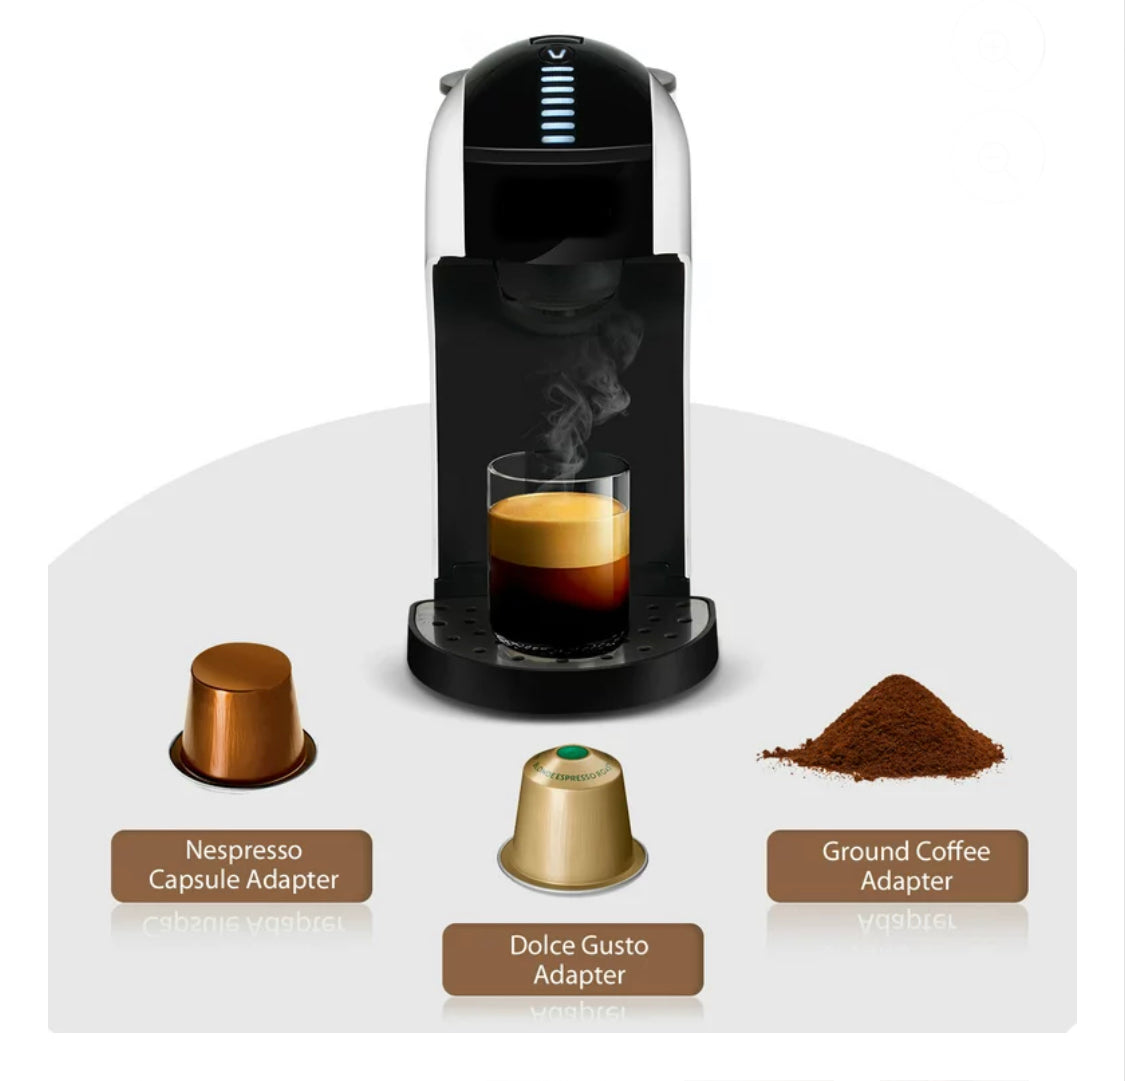 How To Use The Dolce Gusto Coffee Machine